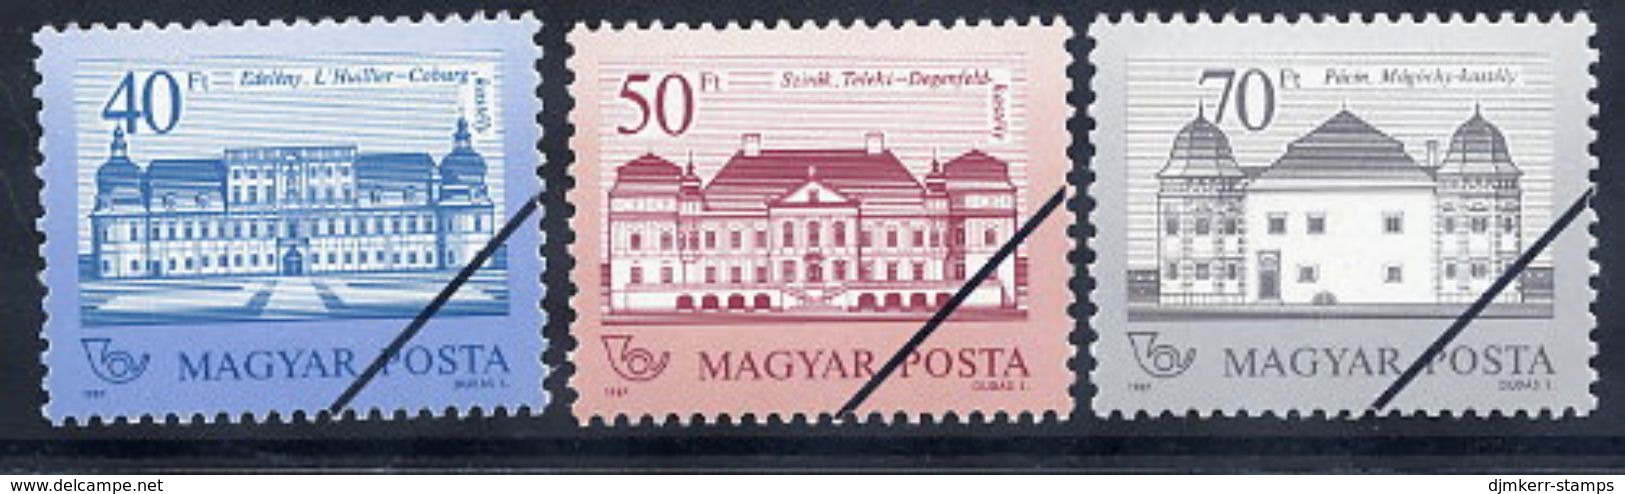 HUNGARY 1987 Castles Definitive Set  With Specimen / Muster Cancellation MNH / **.  Michel 3914-16 - Ungebraucht